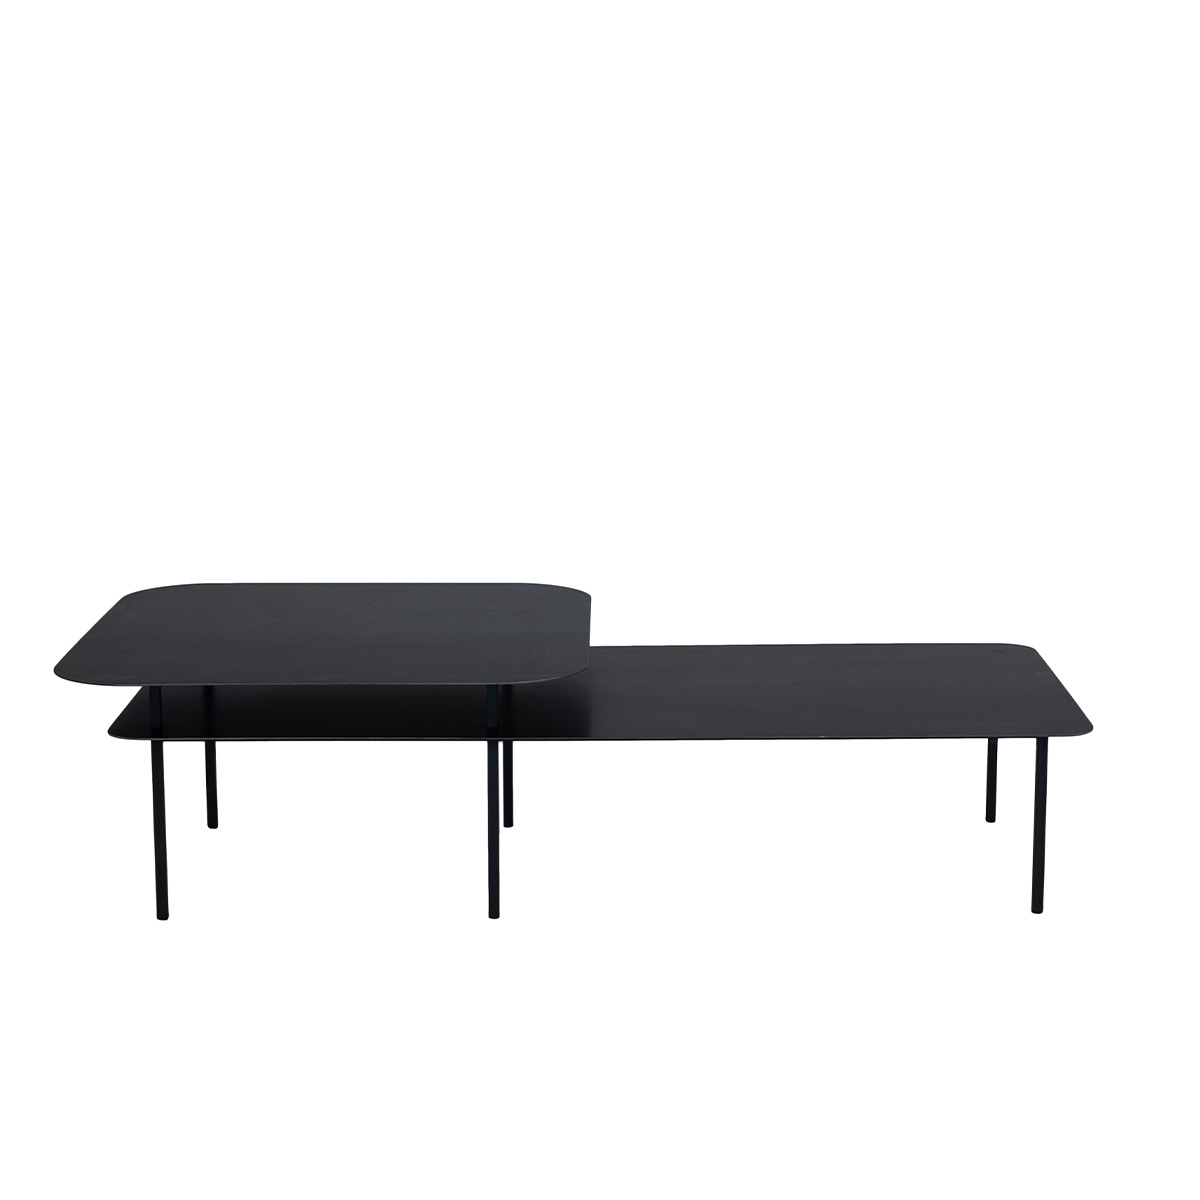 Coffee Table Tokyo Offset Tabletop, Black - L150 x W80 x H40 cm - Waxed steel - image 1